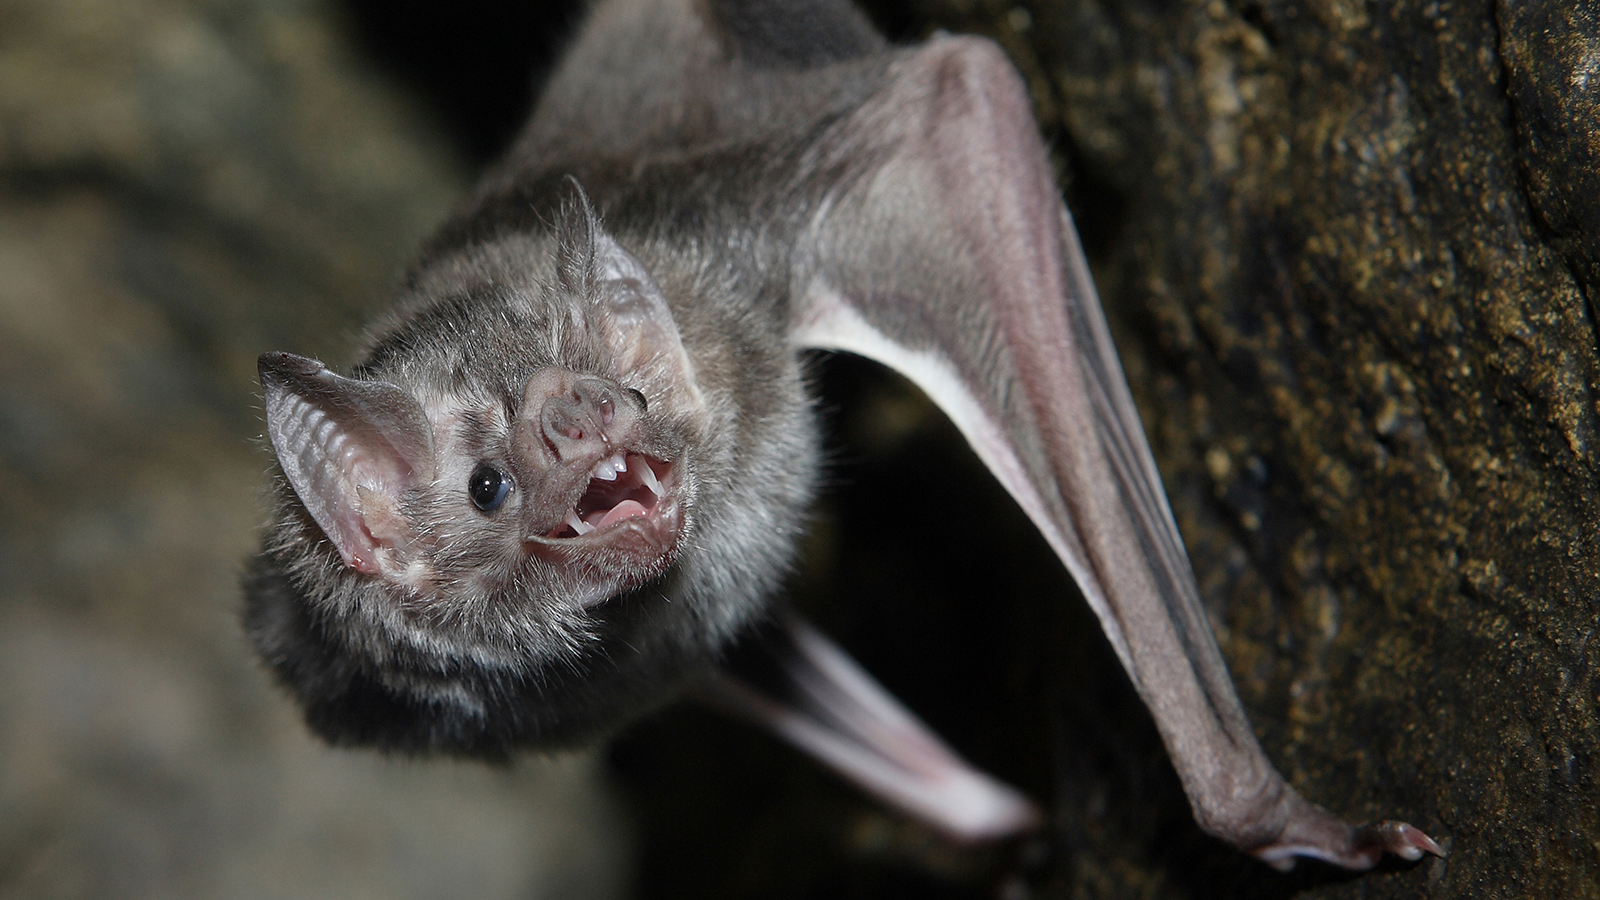 Prove to Be a Trivia Genius by Answering These 20 Random Questions bats